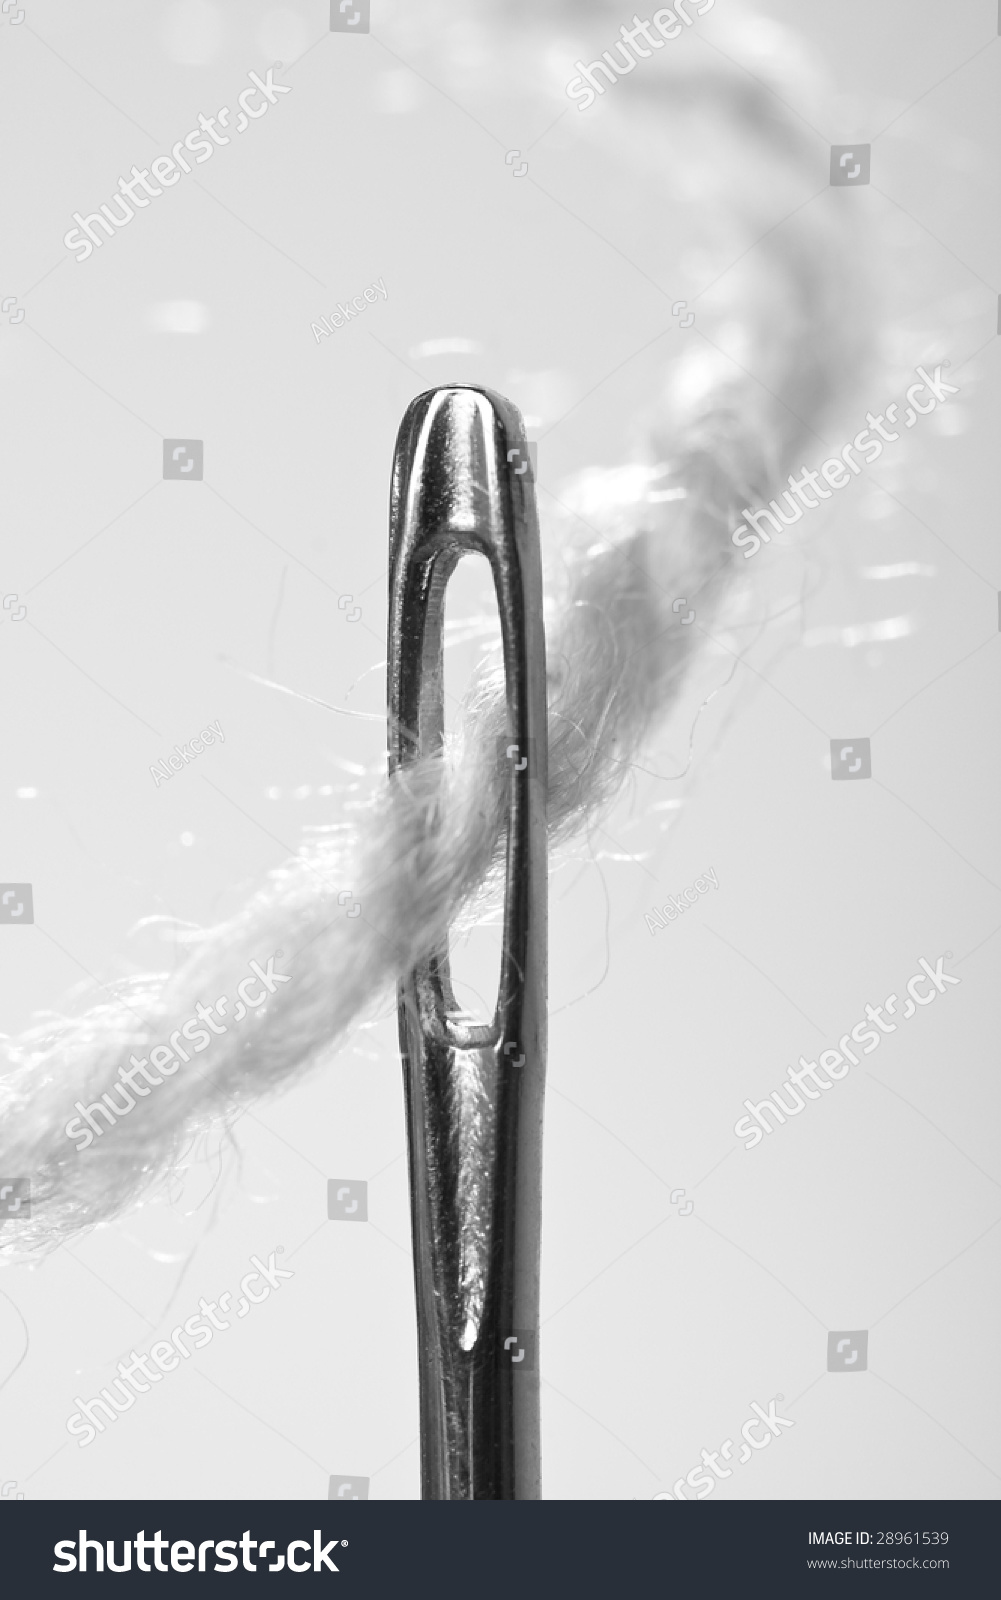 Close-Up Thread A Needle Stock Photo 28961539 : Shutterstock